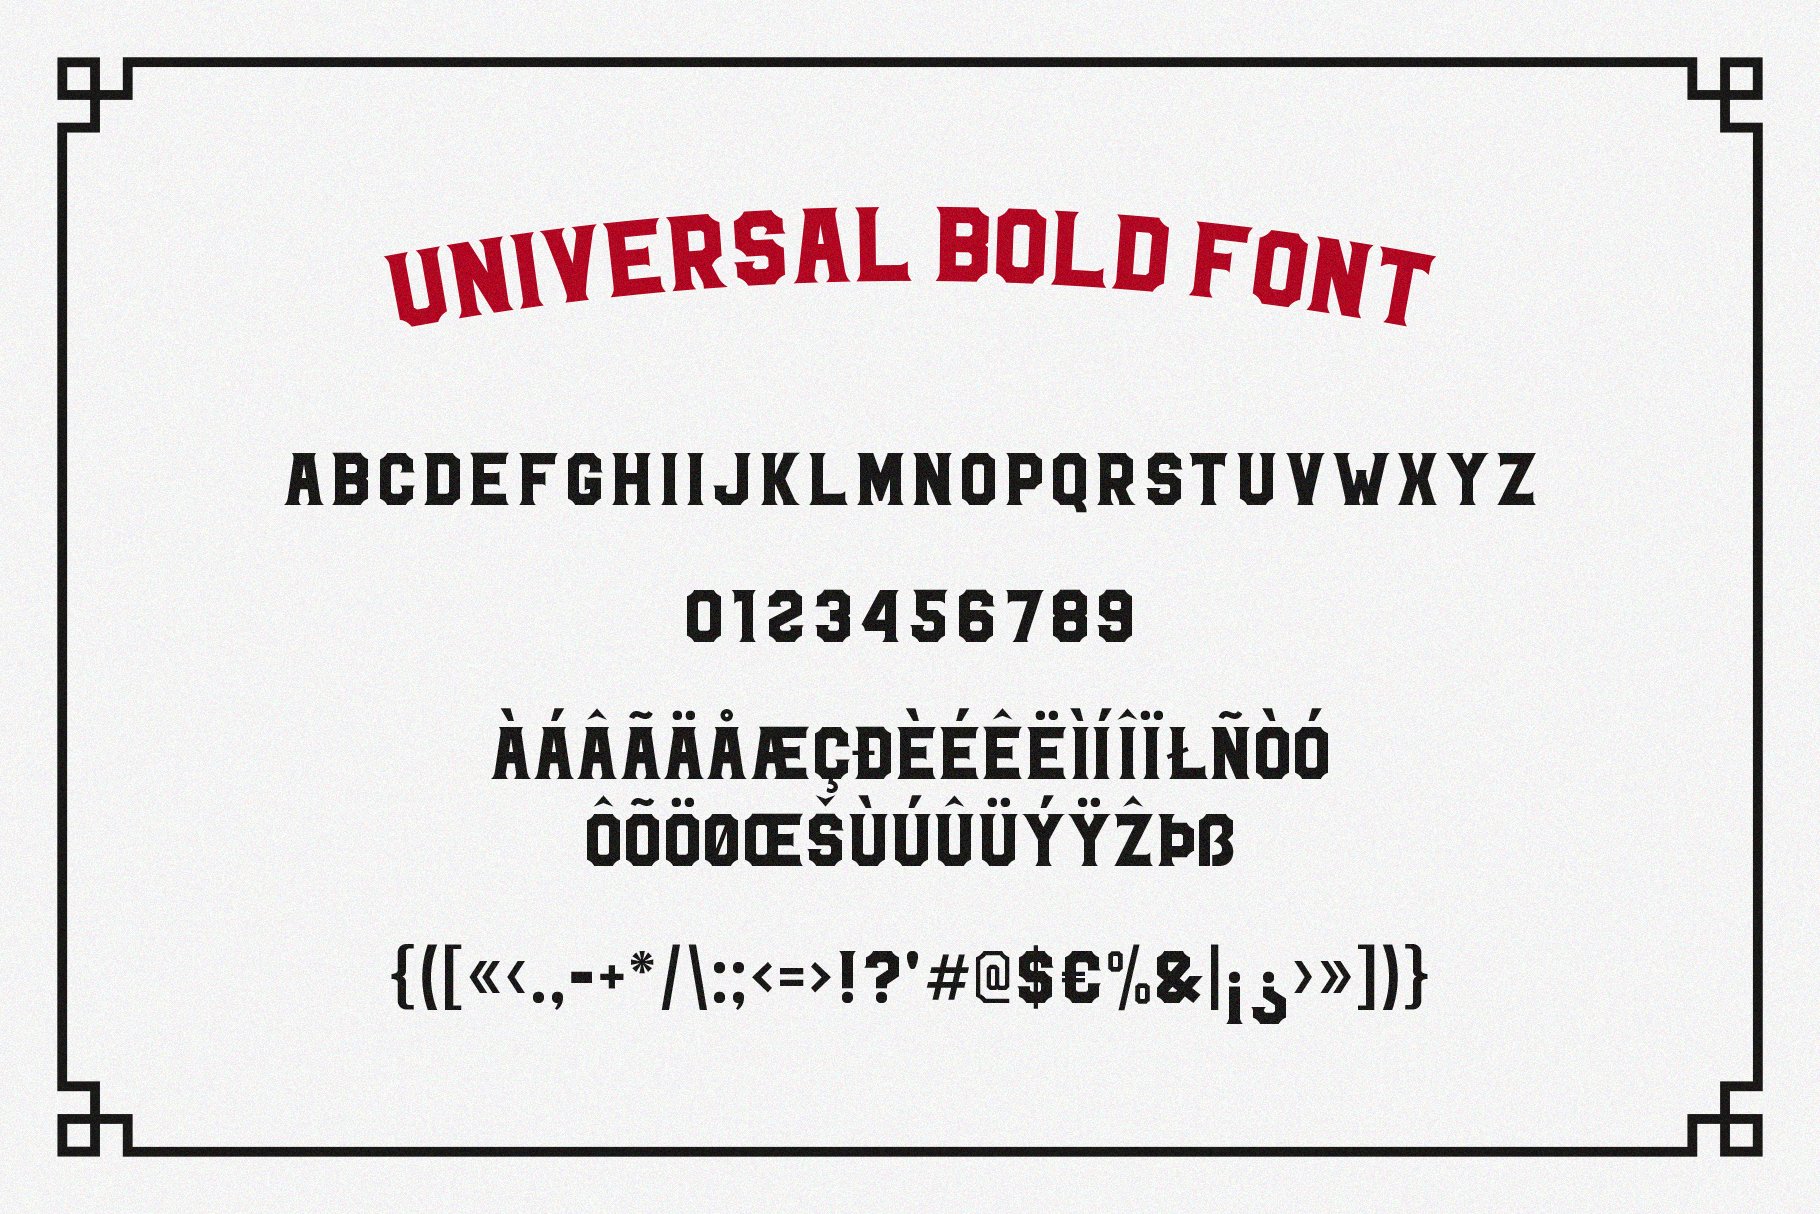 Universal bold font in two colors.